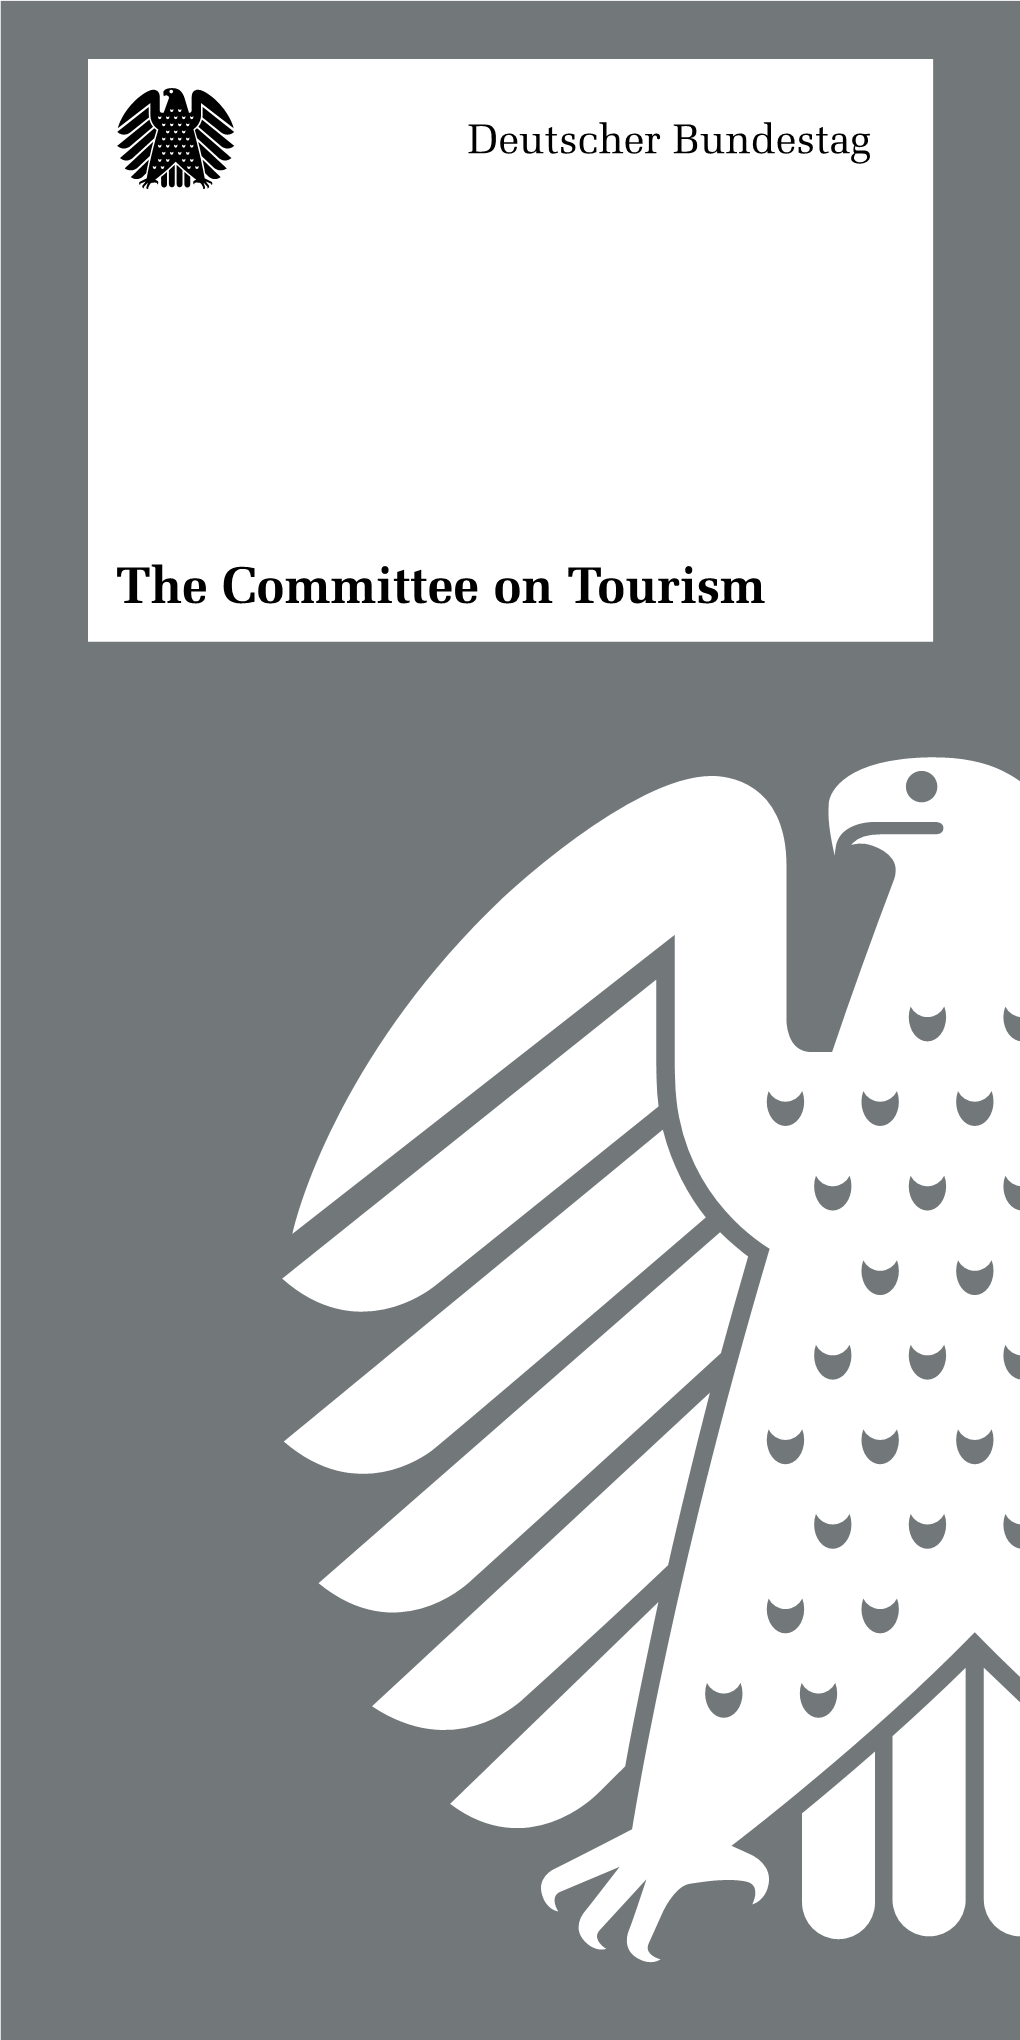 The Committee on Tourism 2 “Every Year, More and More People Spend Their Holidays in Germany